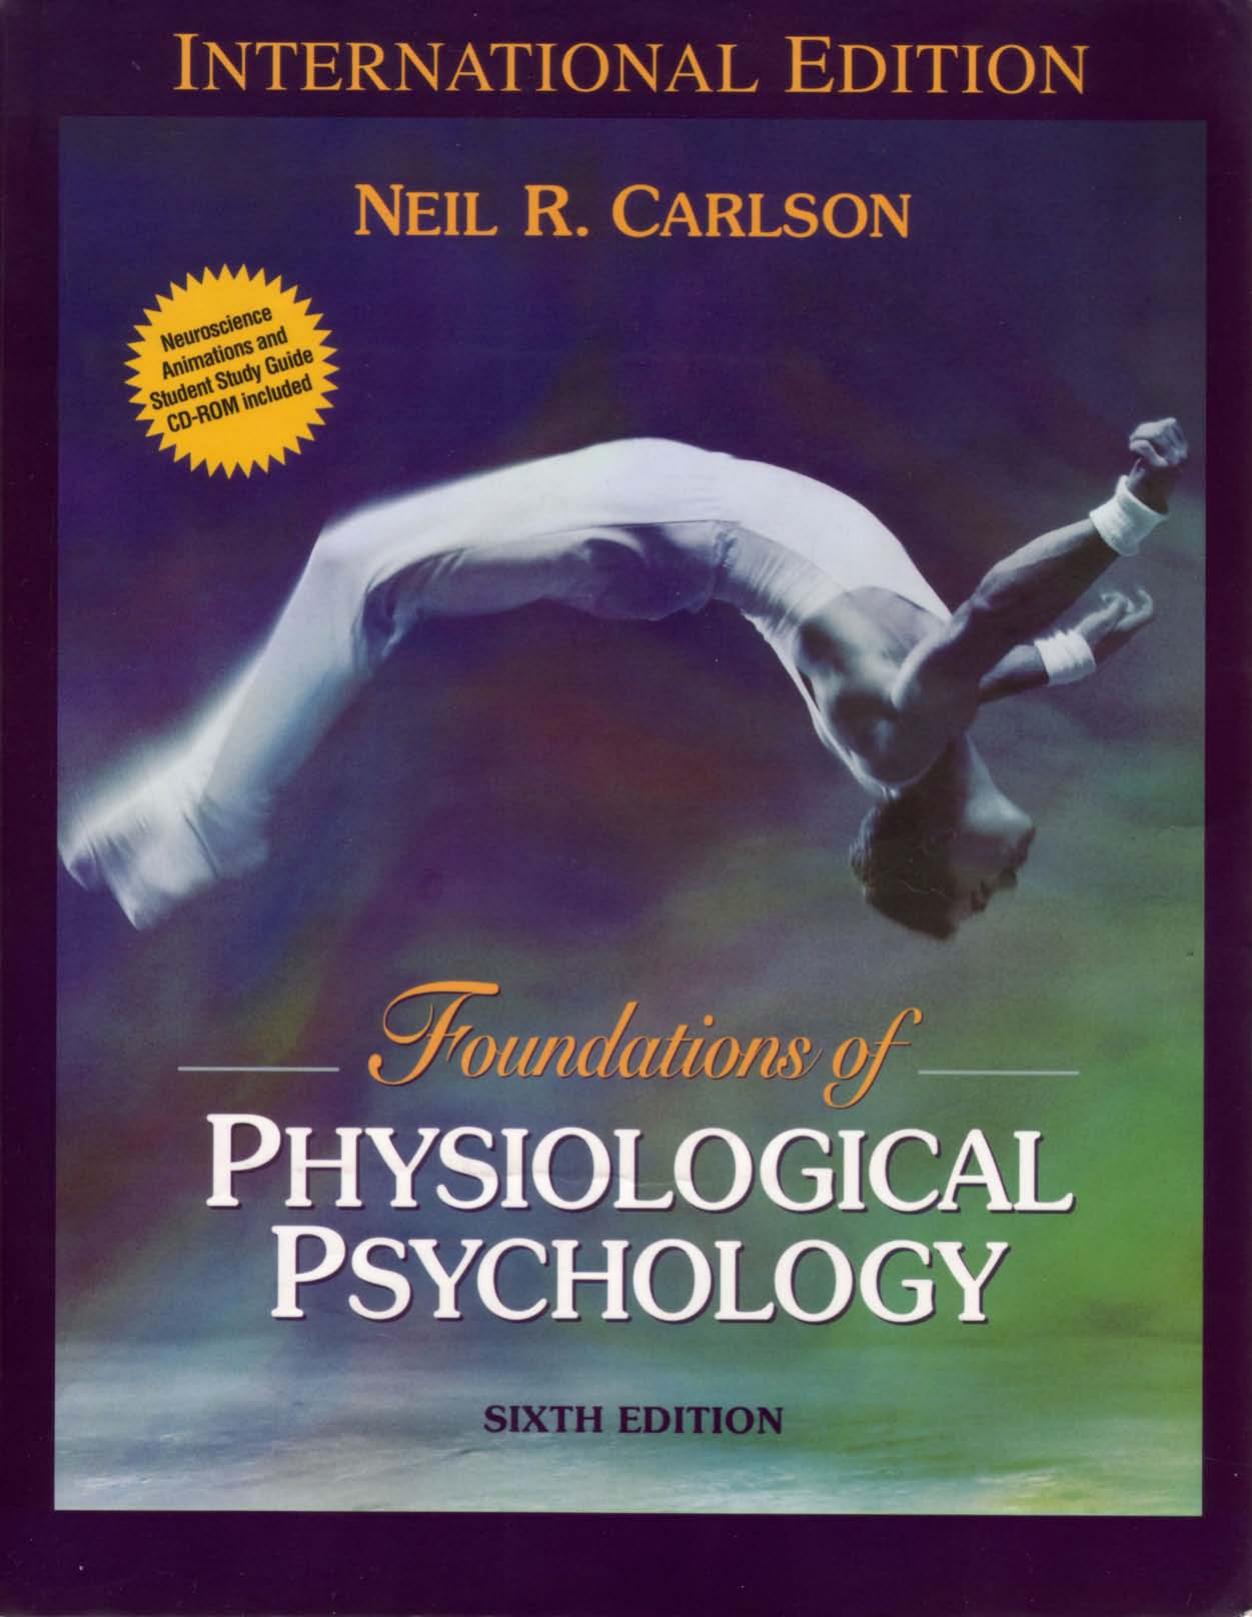 Foundations of Physiological Psychology (6th Edition) 2005